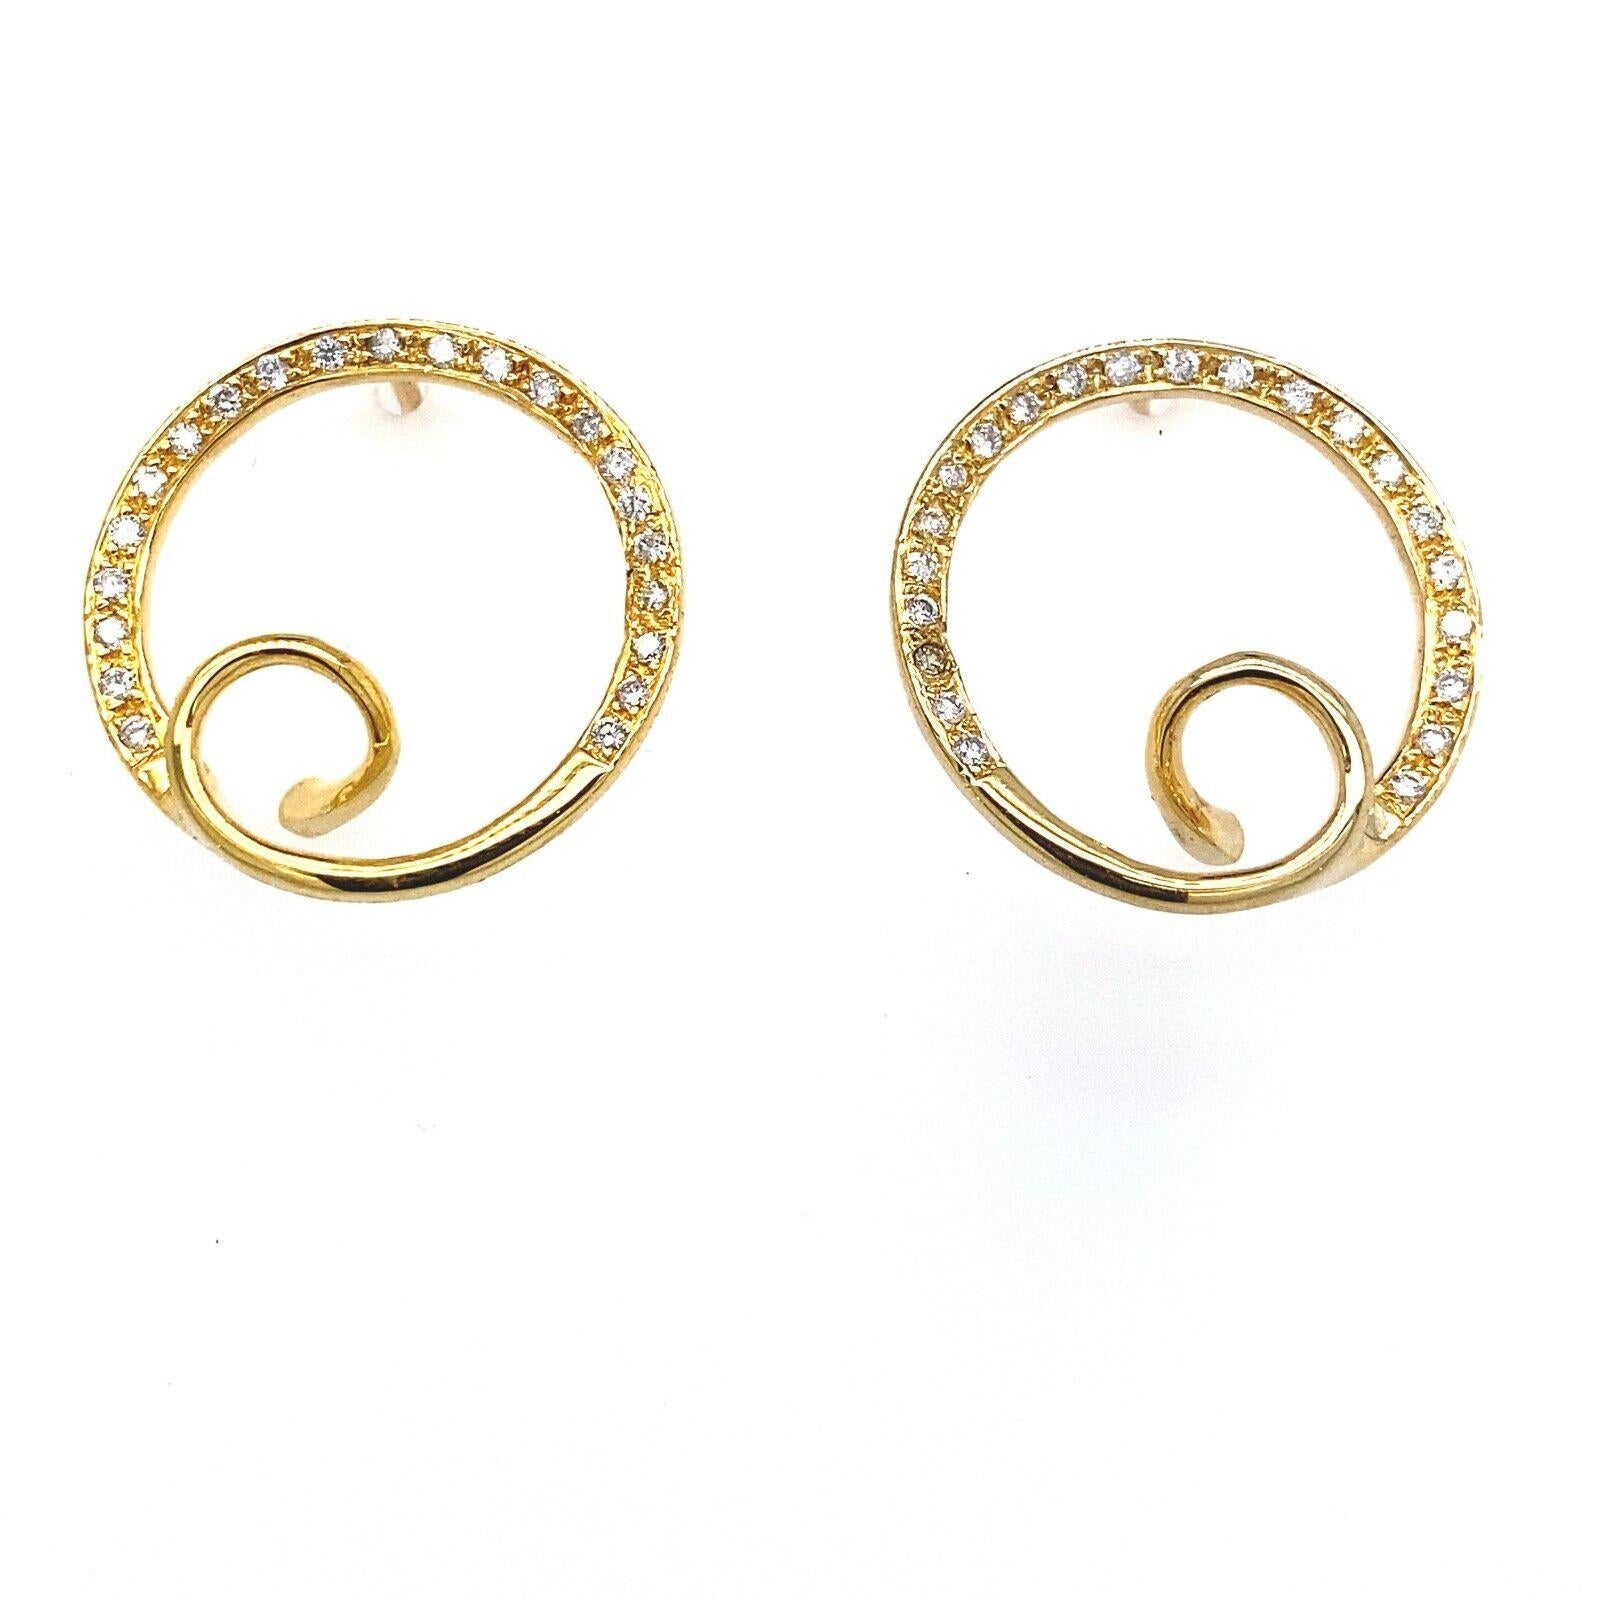 This pair of earrings was designed to be the perfect everyday earring. It features a total of 0.25ct diamonds mounted on a 18ct yellow gold circle shape setting.

Additional Information:
Total Weight: 3.7g
Earrings Dimension: 19mm
Total Diamond